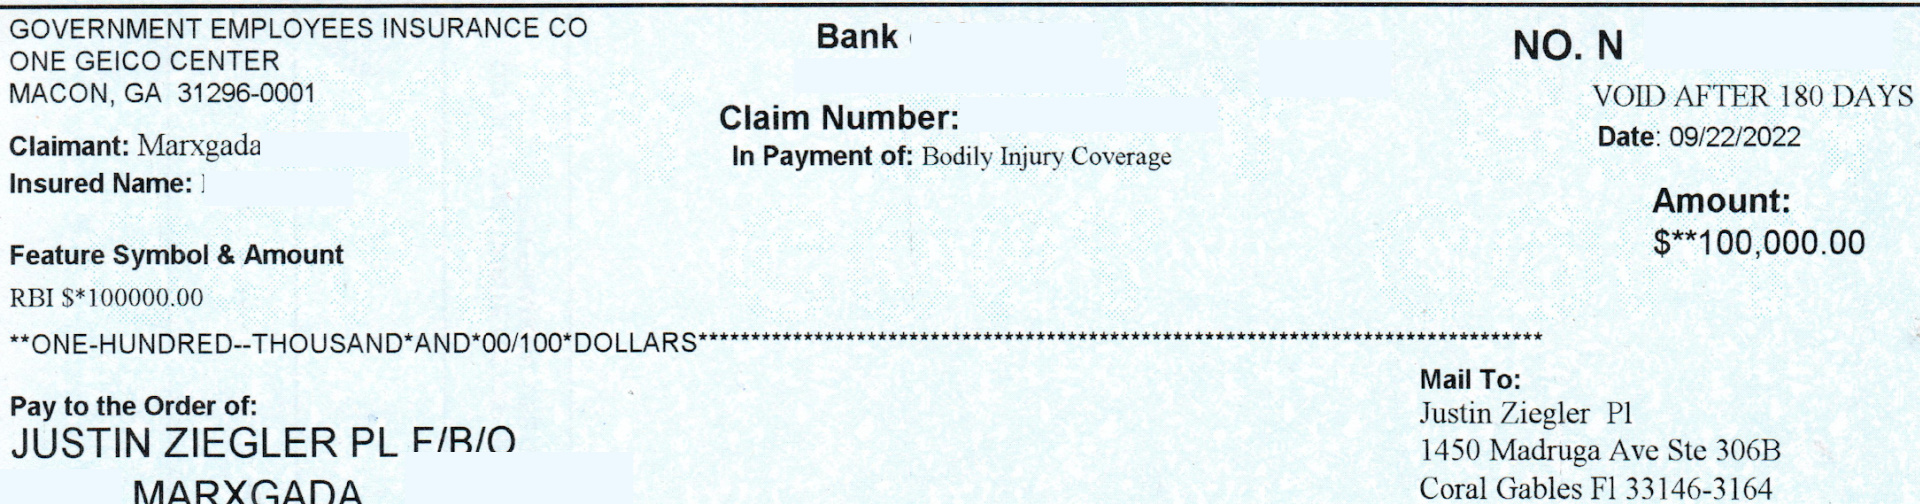 $100,000 GEICO settlement check for bodily injury coverage in 2022 (redacted)